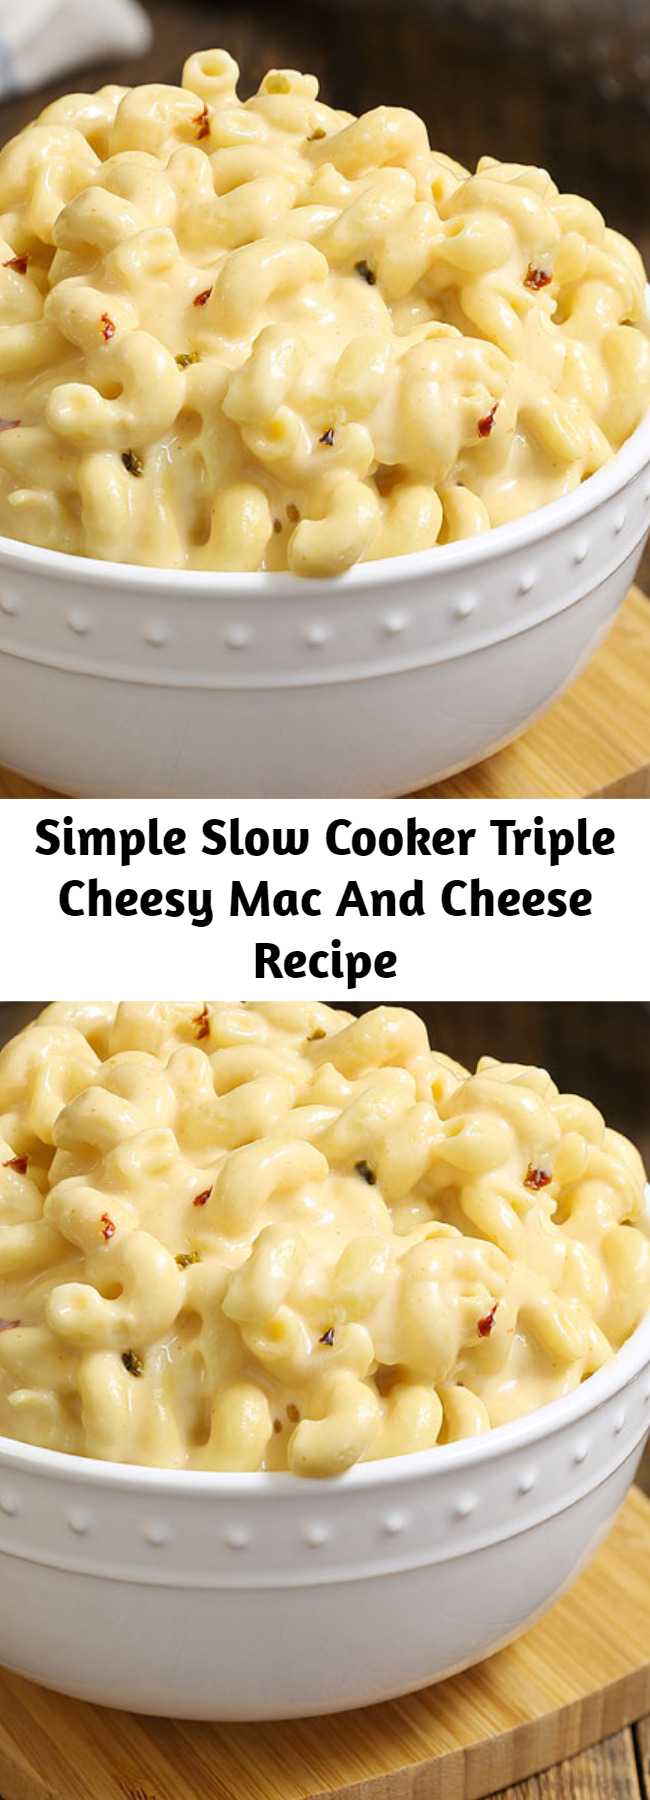 Simple Slow Cooker Triple Cheesy Mac And Cheese Recipe - A simple recipe that you can toss together in just 5 minutes. It’s pure comfort in a bowl, with perfectly tender corkscrew pasta with twists and ridges that capture the luscious pepper Jack and cheddar cheese sauce. It has just enough heat to wake up your taste buds. Check out the video above the recipe to see how easy this Best Ever Mac and Cheese is to make! #slowcooker #macandcheese